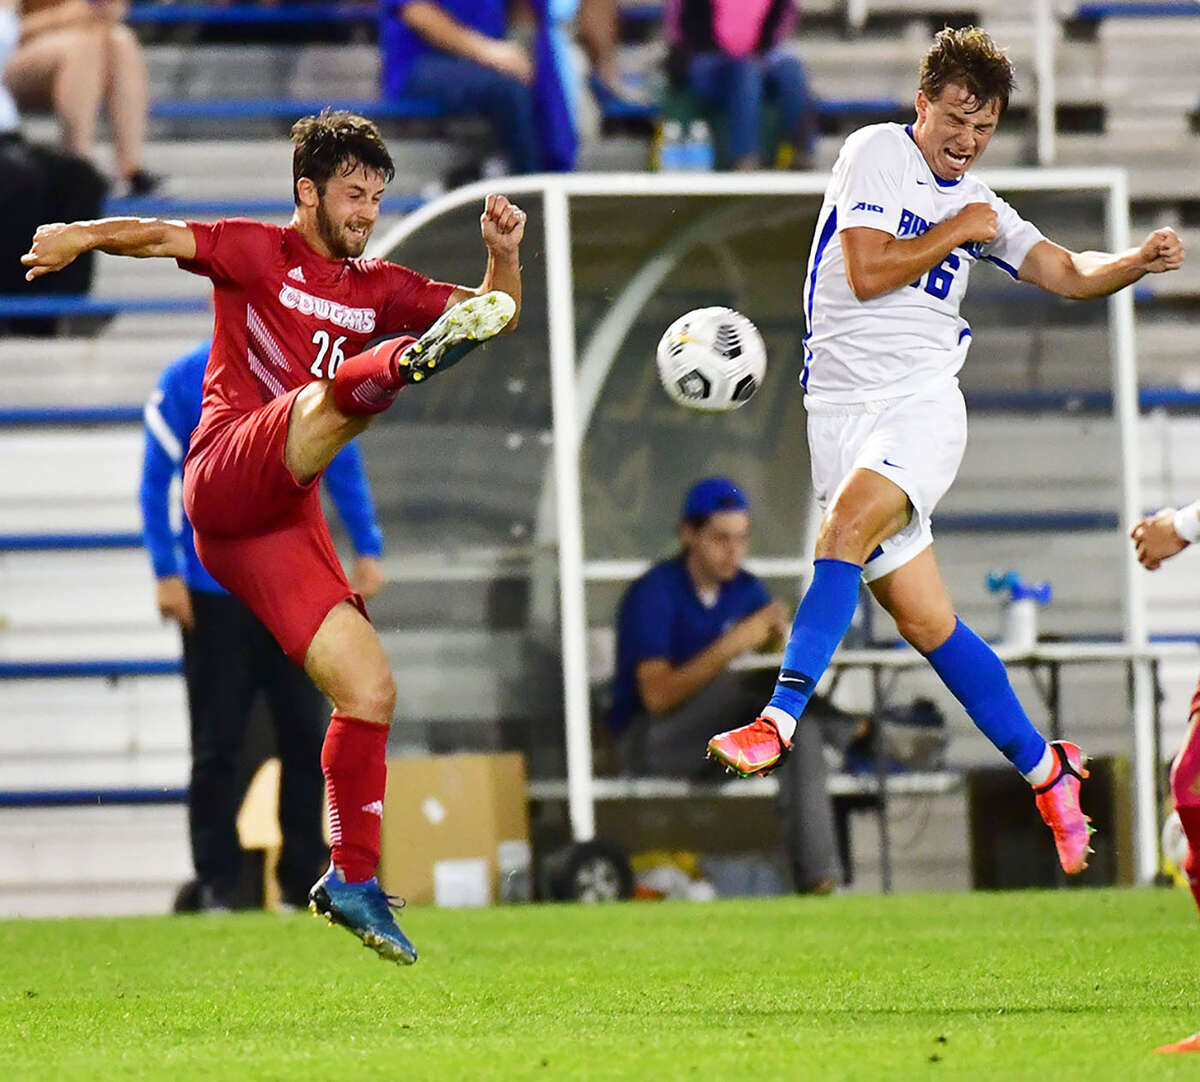 Seth Anderson of Saint Louis University, right, winces as Corban McAvinew volleys a shot during last season's Bronze Boot Game at SLU. The 2022 Bronze Boot Game will be played at SIUE on Sept. 13 at Korte Stadium.